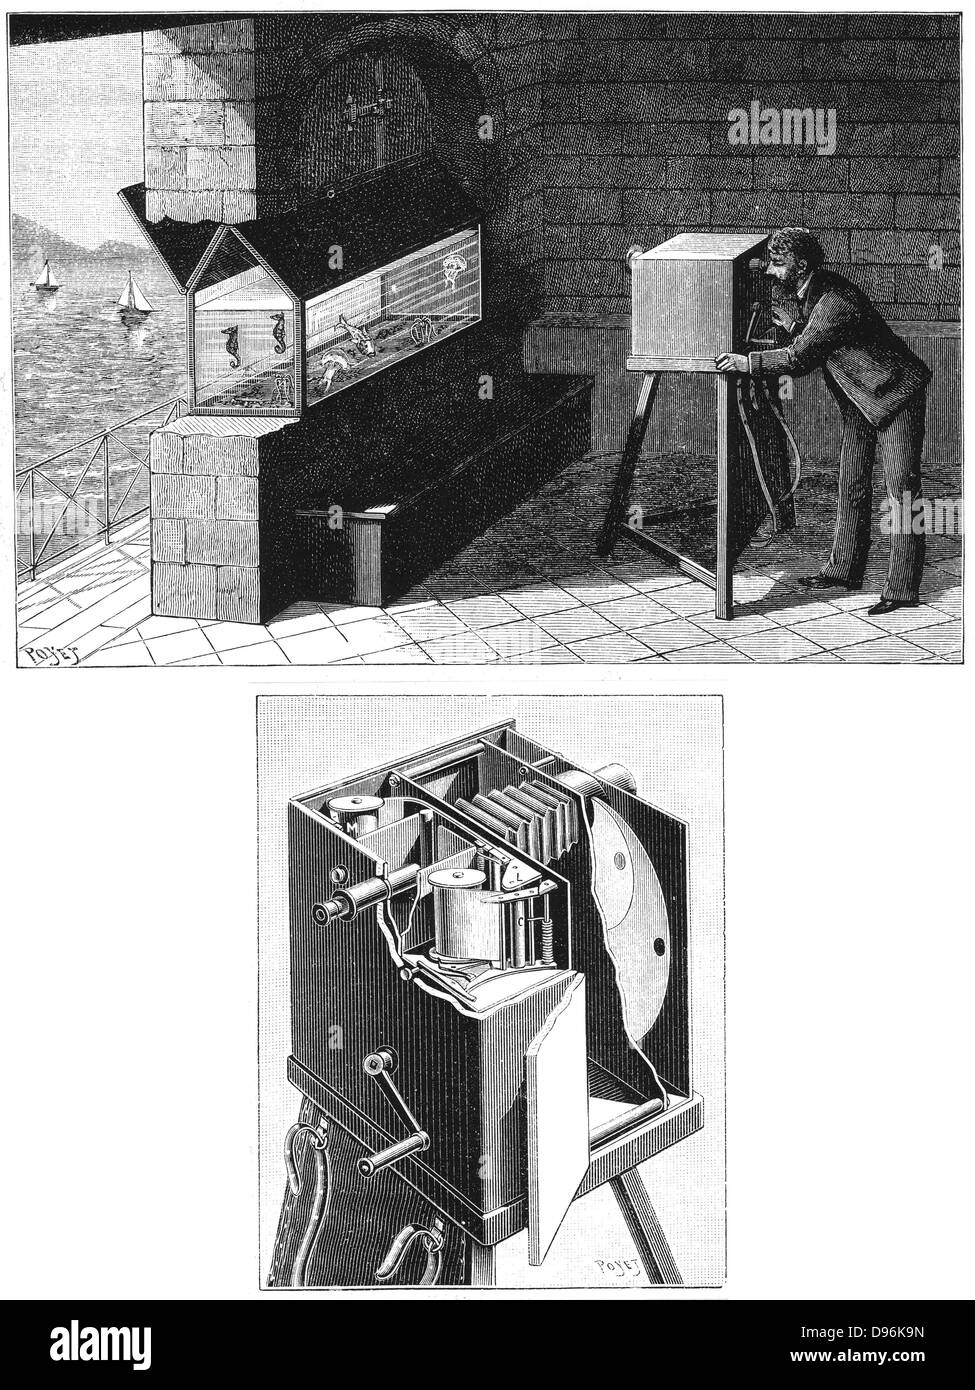 Etienne Jules Marey's (1830-1903) chambre chrono-photographique, the first cine-camera, being used to study movement of creatures in aquarium (top). Below, camera  detail, showing ribbon of light-sensitive paper by either Eastman or Balagny. Engraving published Paris 1903. Stock Photo